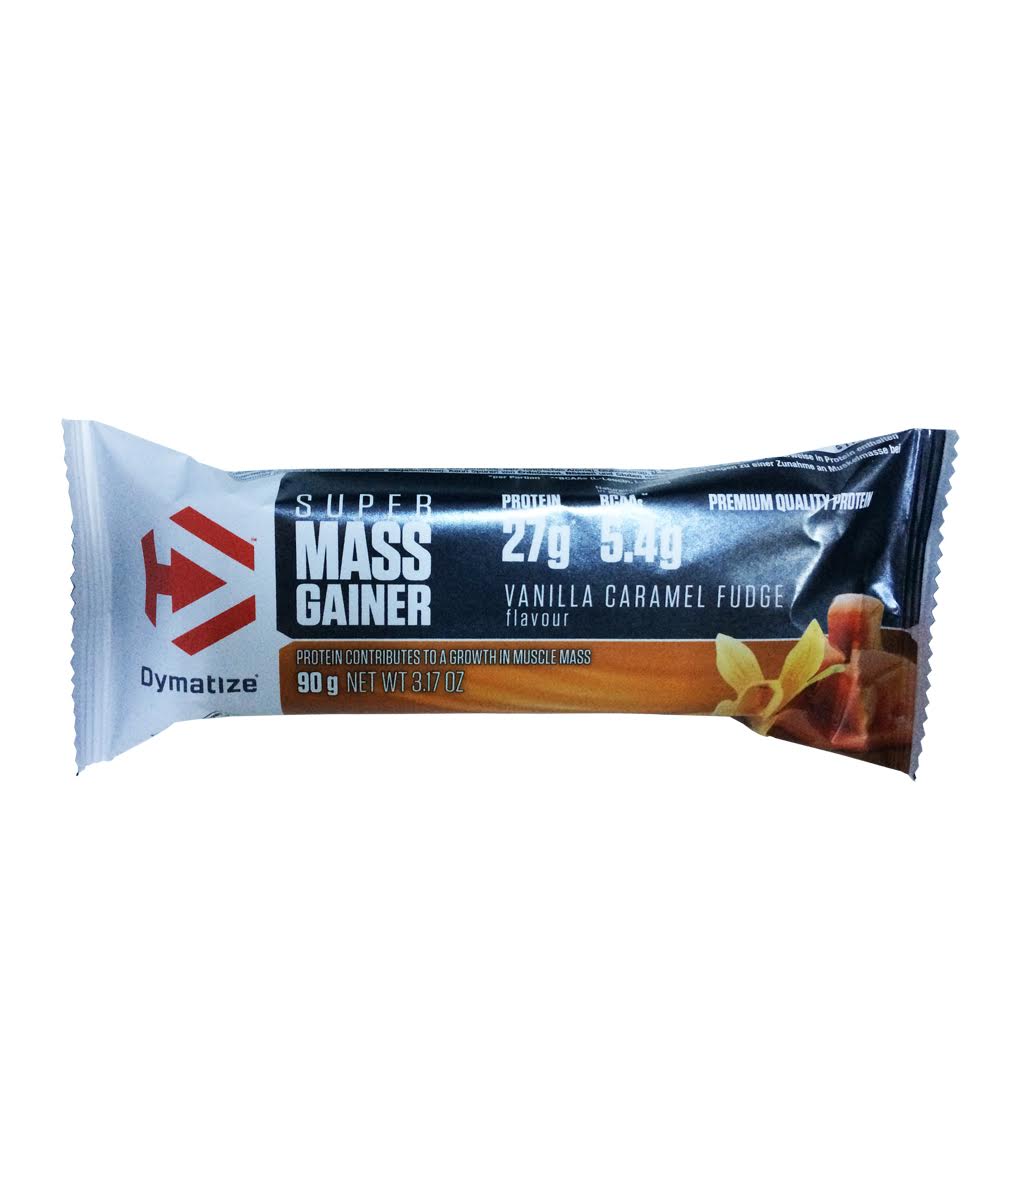 Dymatize - Super Mass Gainer Protein Bar Protein Outelt